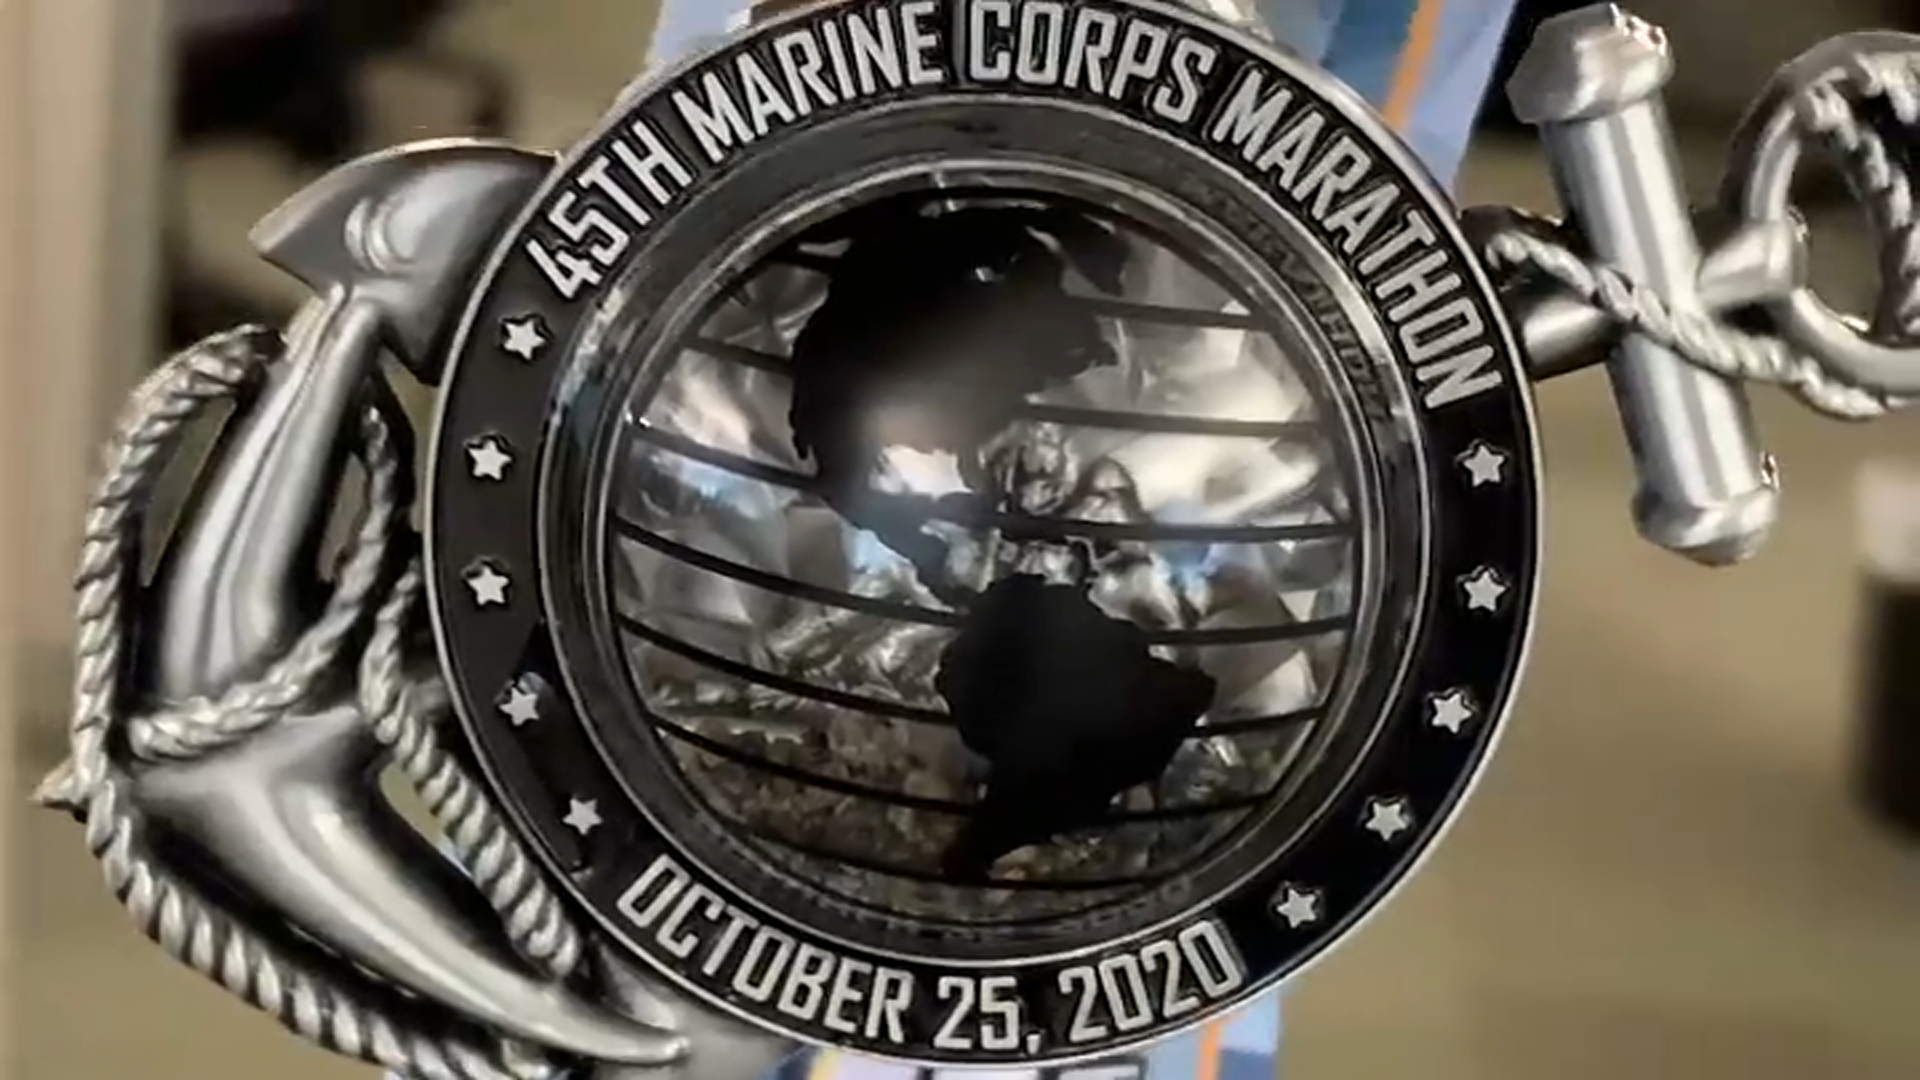 Marine Corps Marathon Earns Gold Certification for Social and